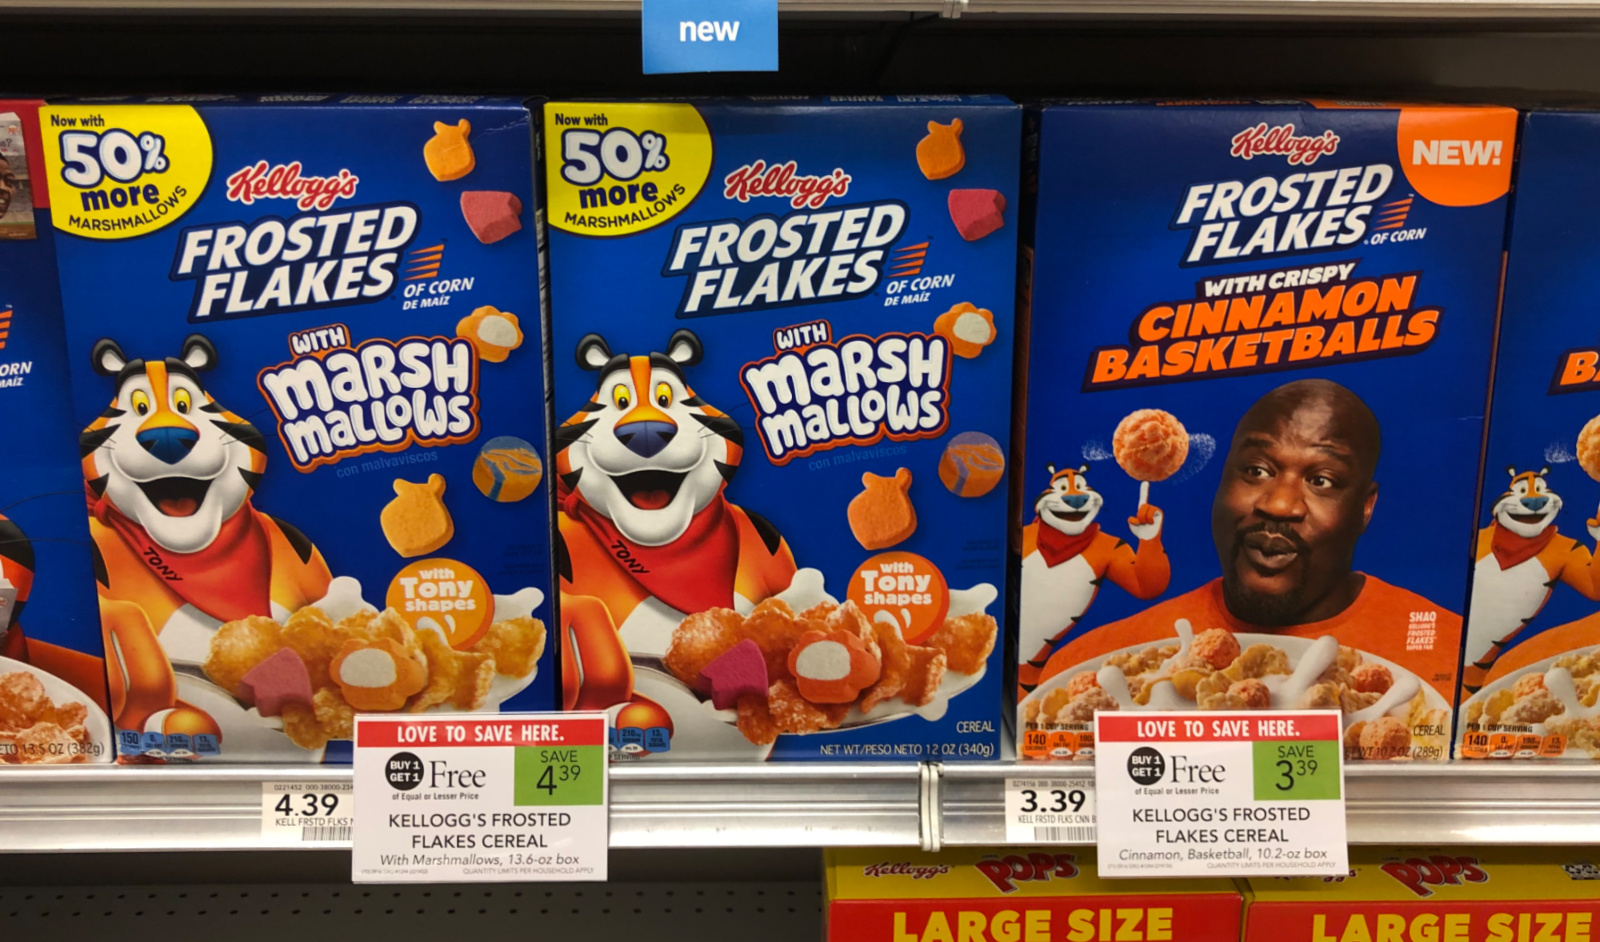 Join Mission Tiger To Keep Kids Playing - Your Kellogg's Frosted Flakes Purchase Can Provide A $2 Donation To Support Kids Sports on I Heart Publix